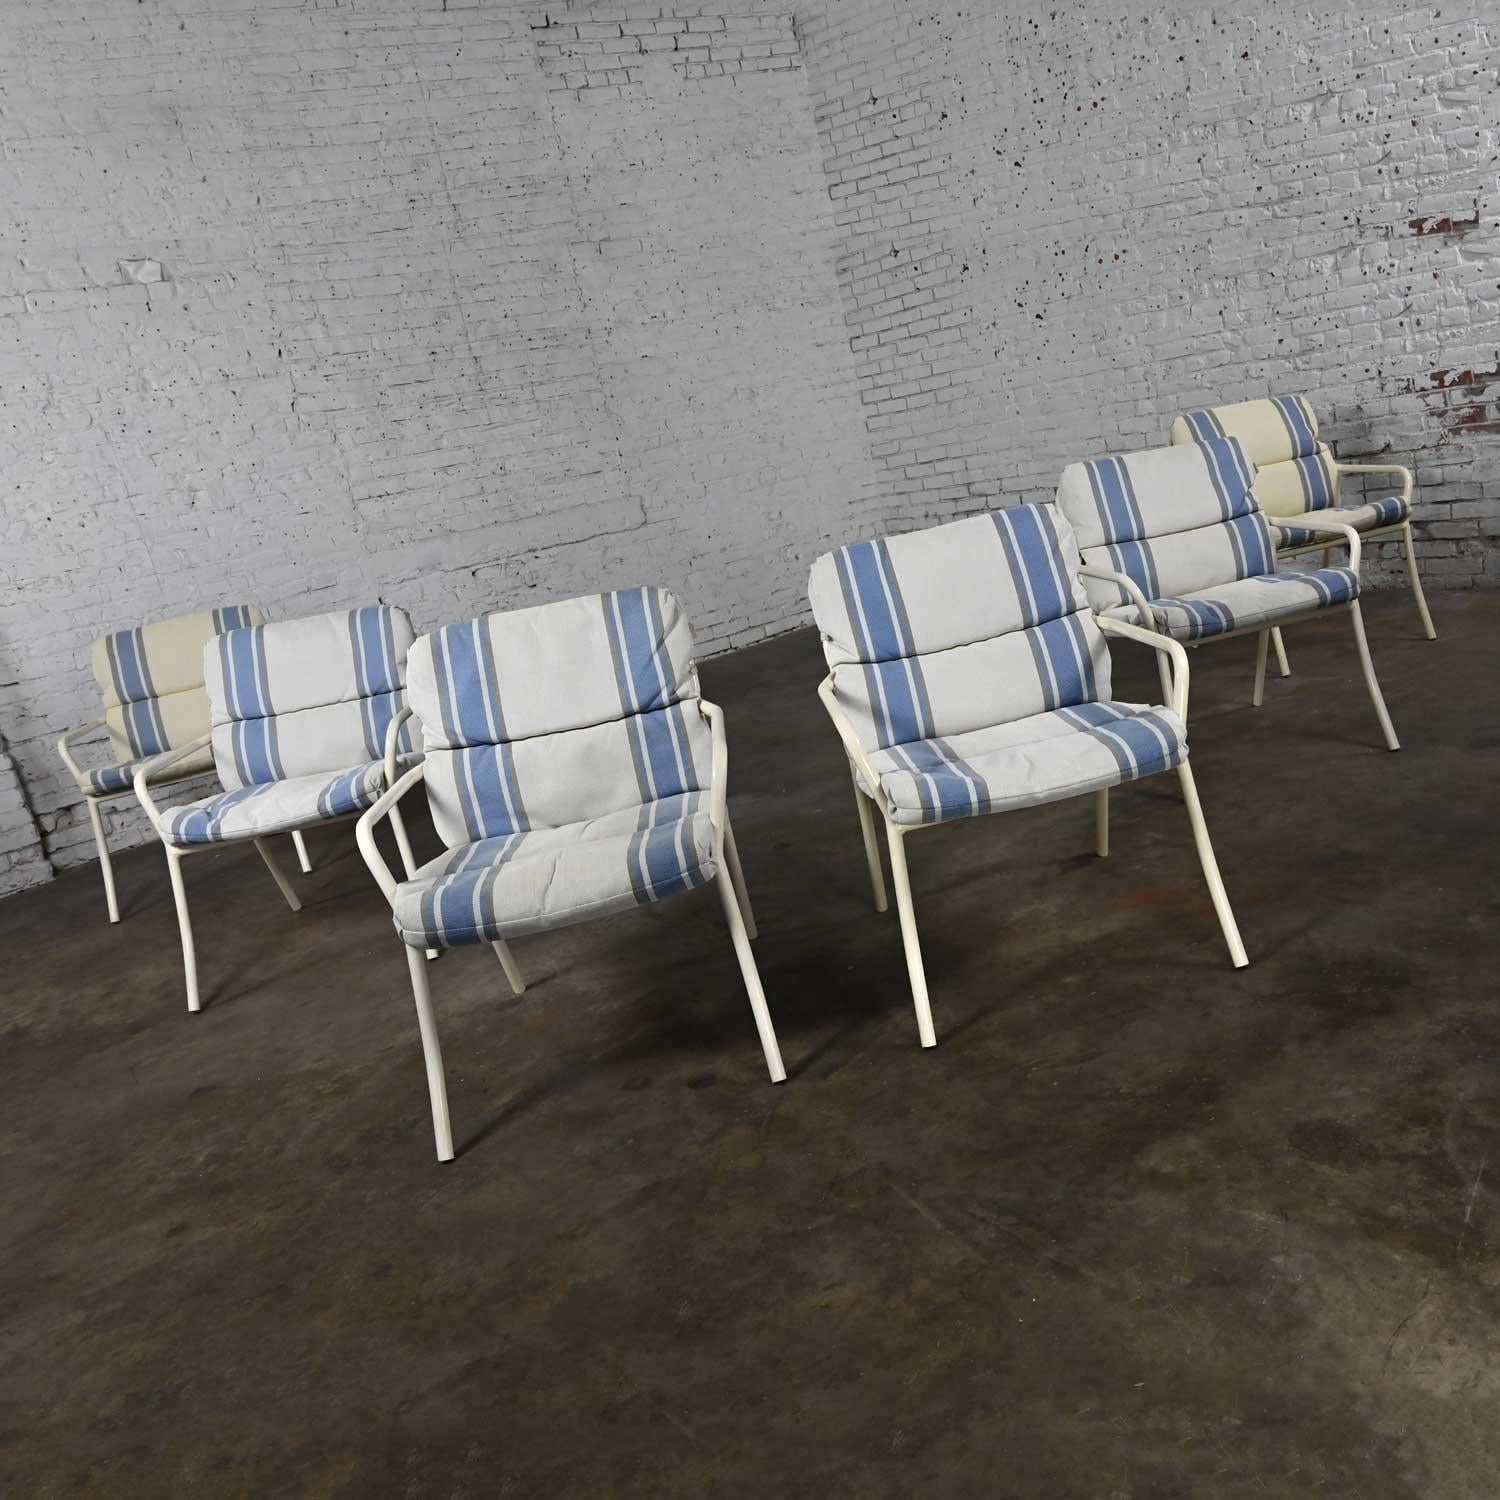 American Mid-20th Century MCM Tropitone Outdoor Chairs with Vinyl Straps & Cushions Set 6 For Sale